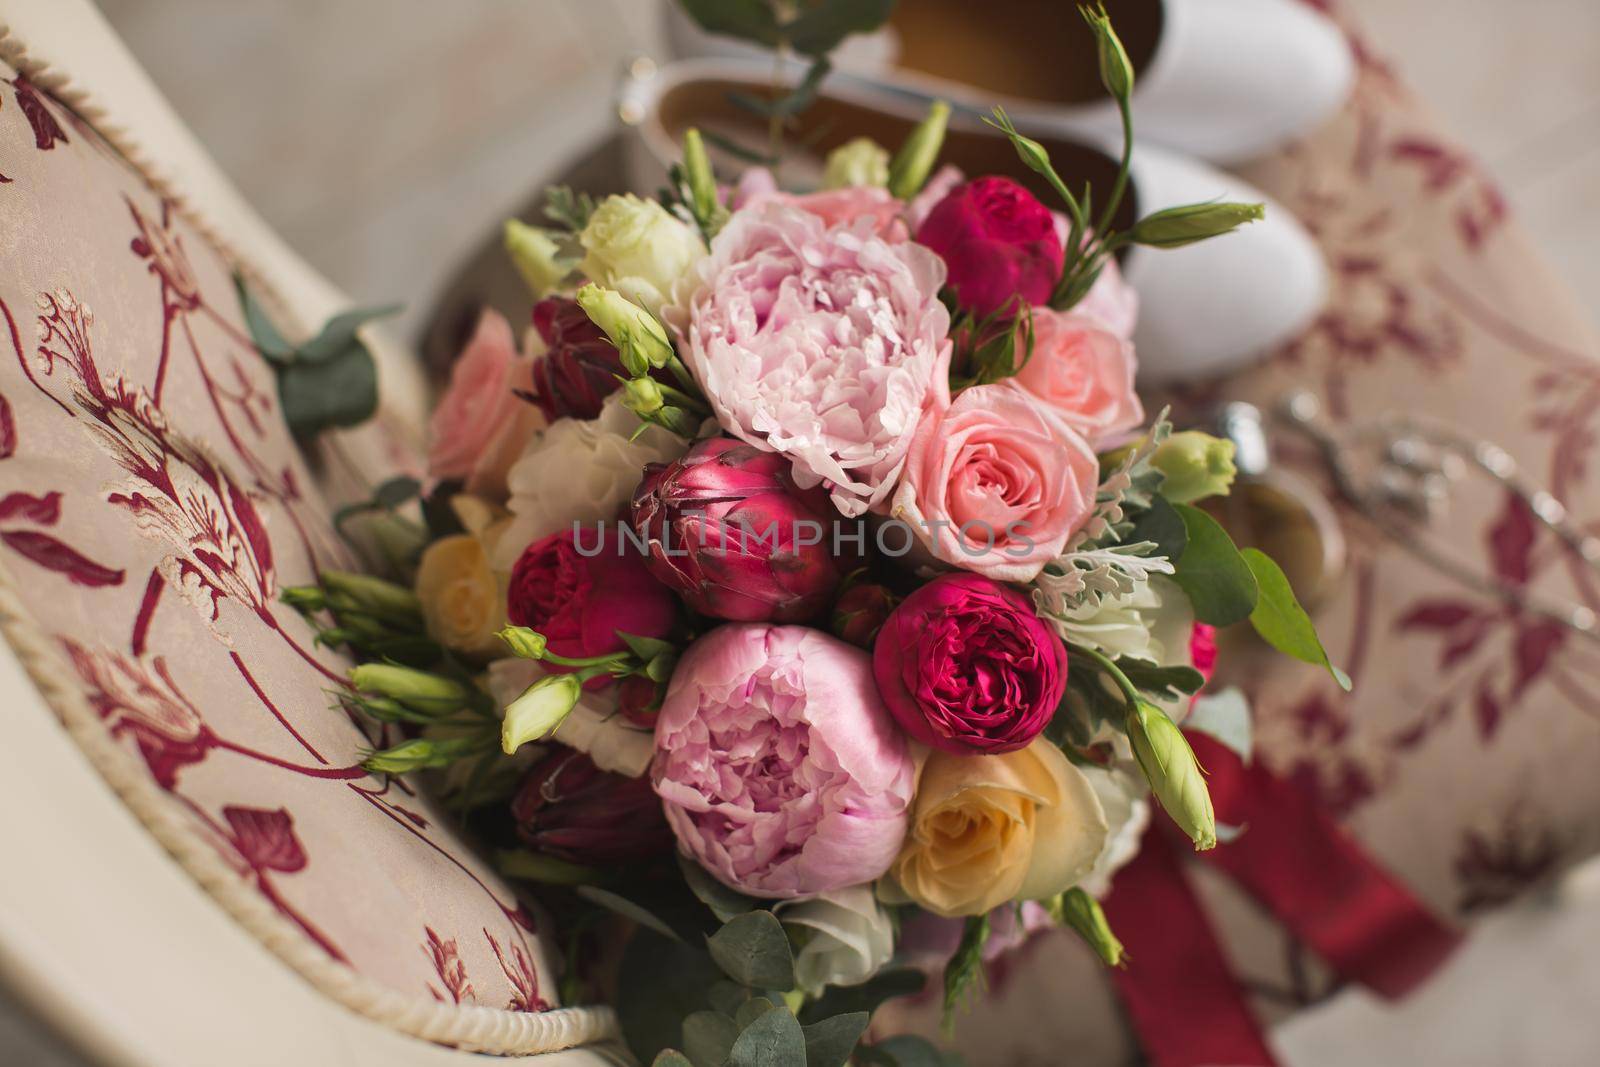 Wedding details. Accessories for the bride: a bouquet and shoes on a chair by StudioPeace